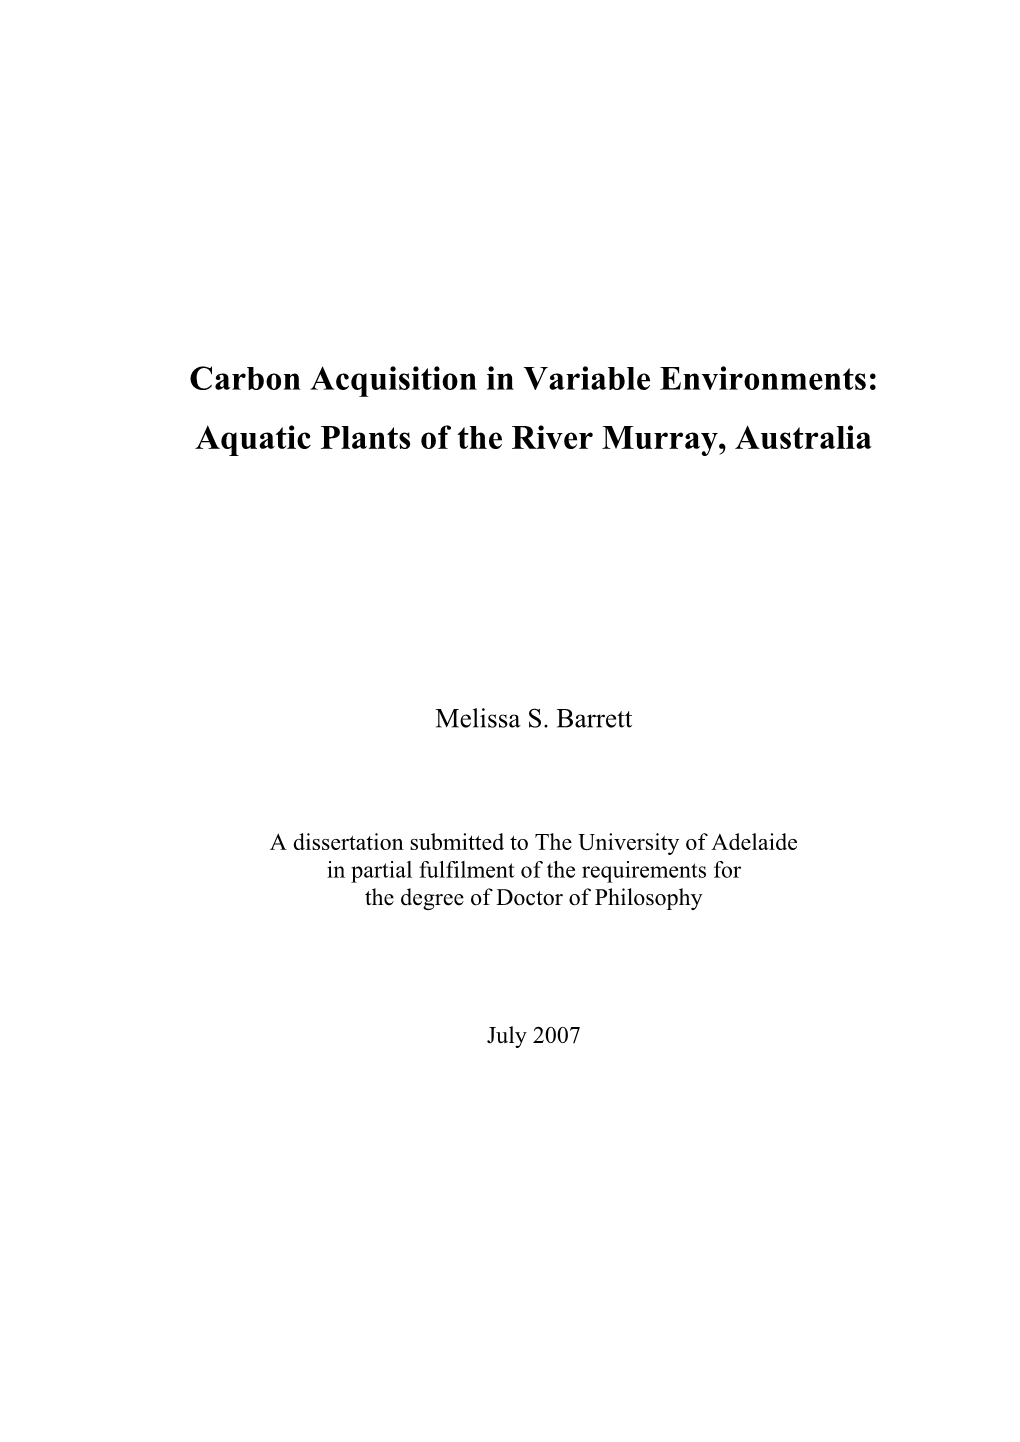 Carbon Acquisition in Variable Environments: Aquatic Plants of the River Murray, Australia